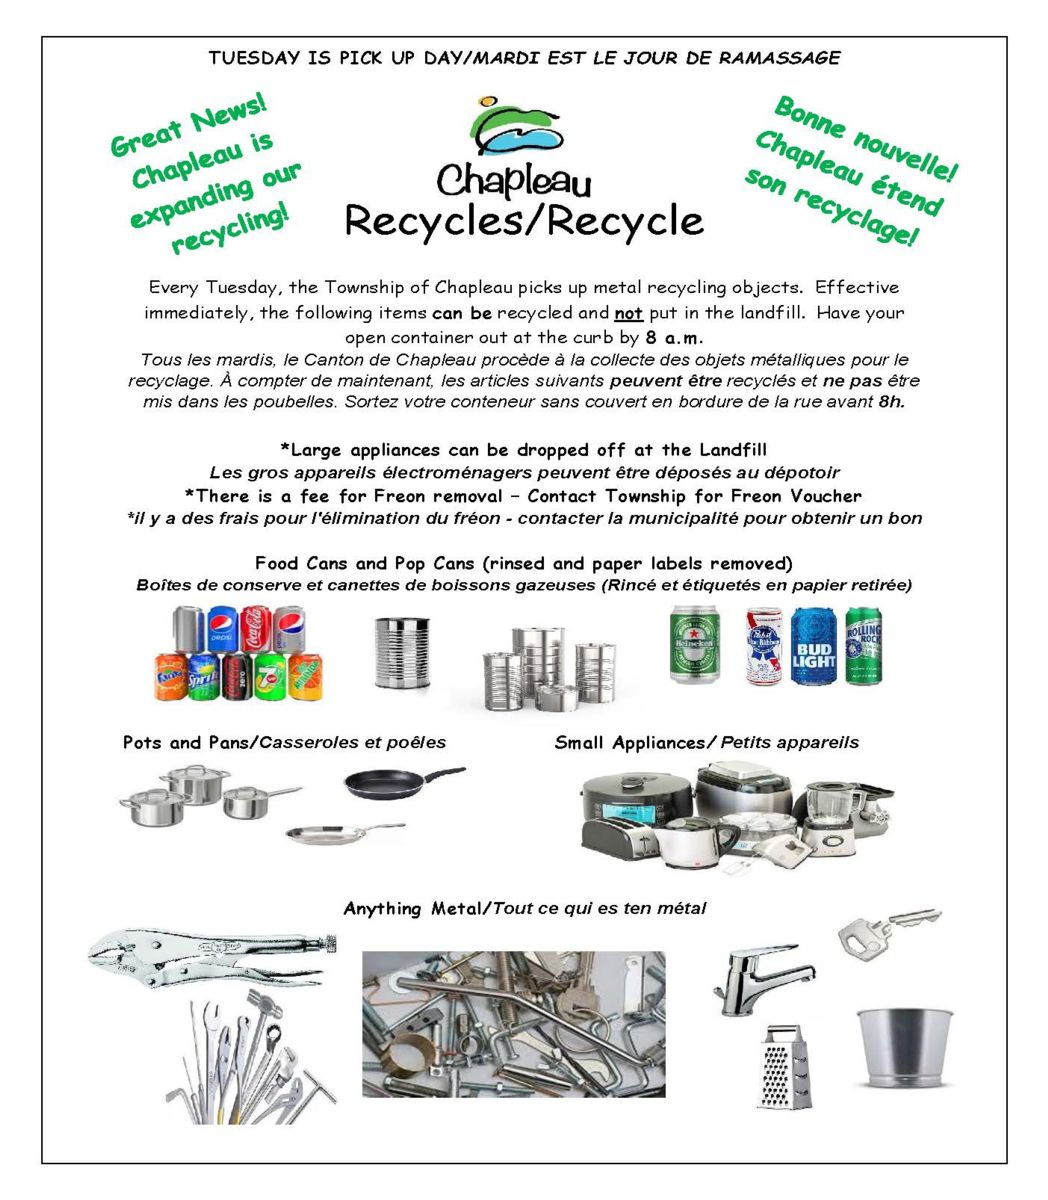 Chapleau recycles household metals including cans, pots and pans, cutlery, small appliances and anything metal.